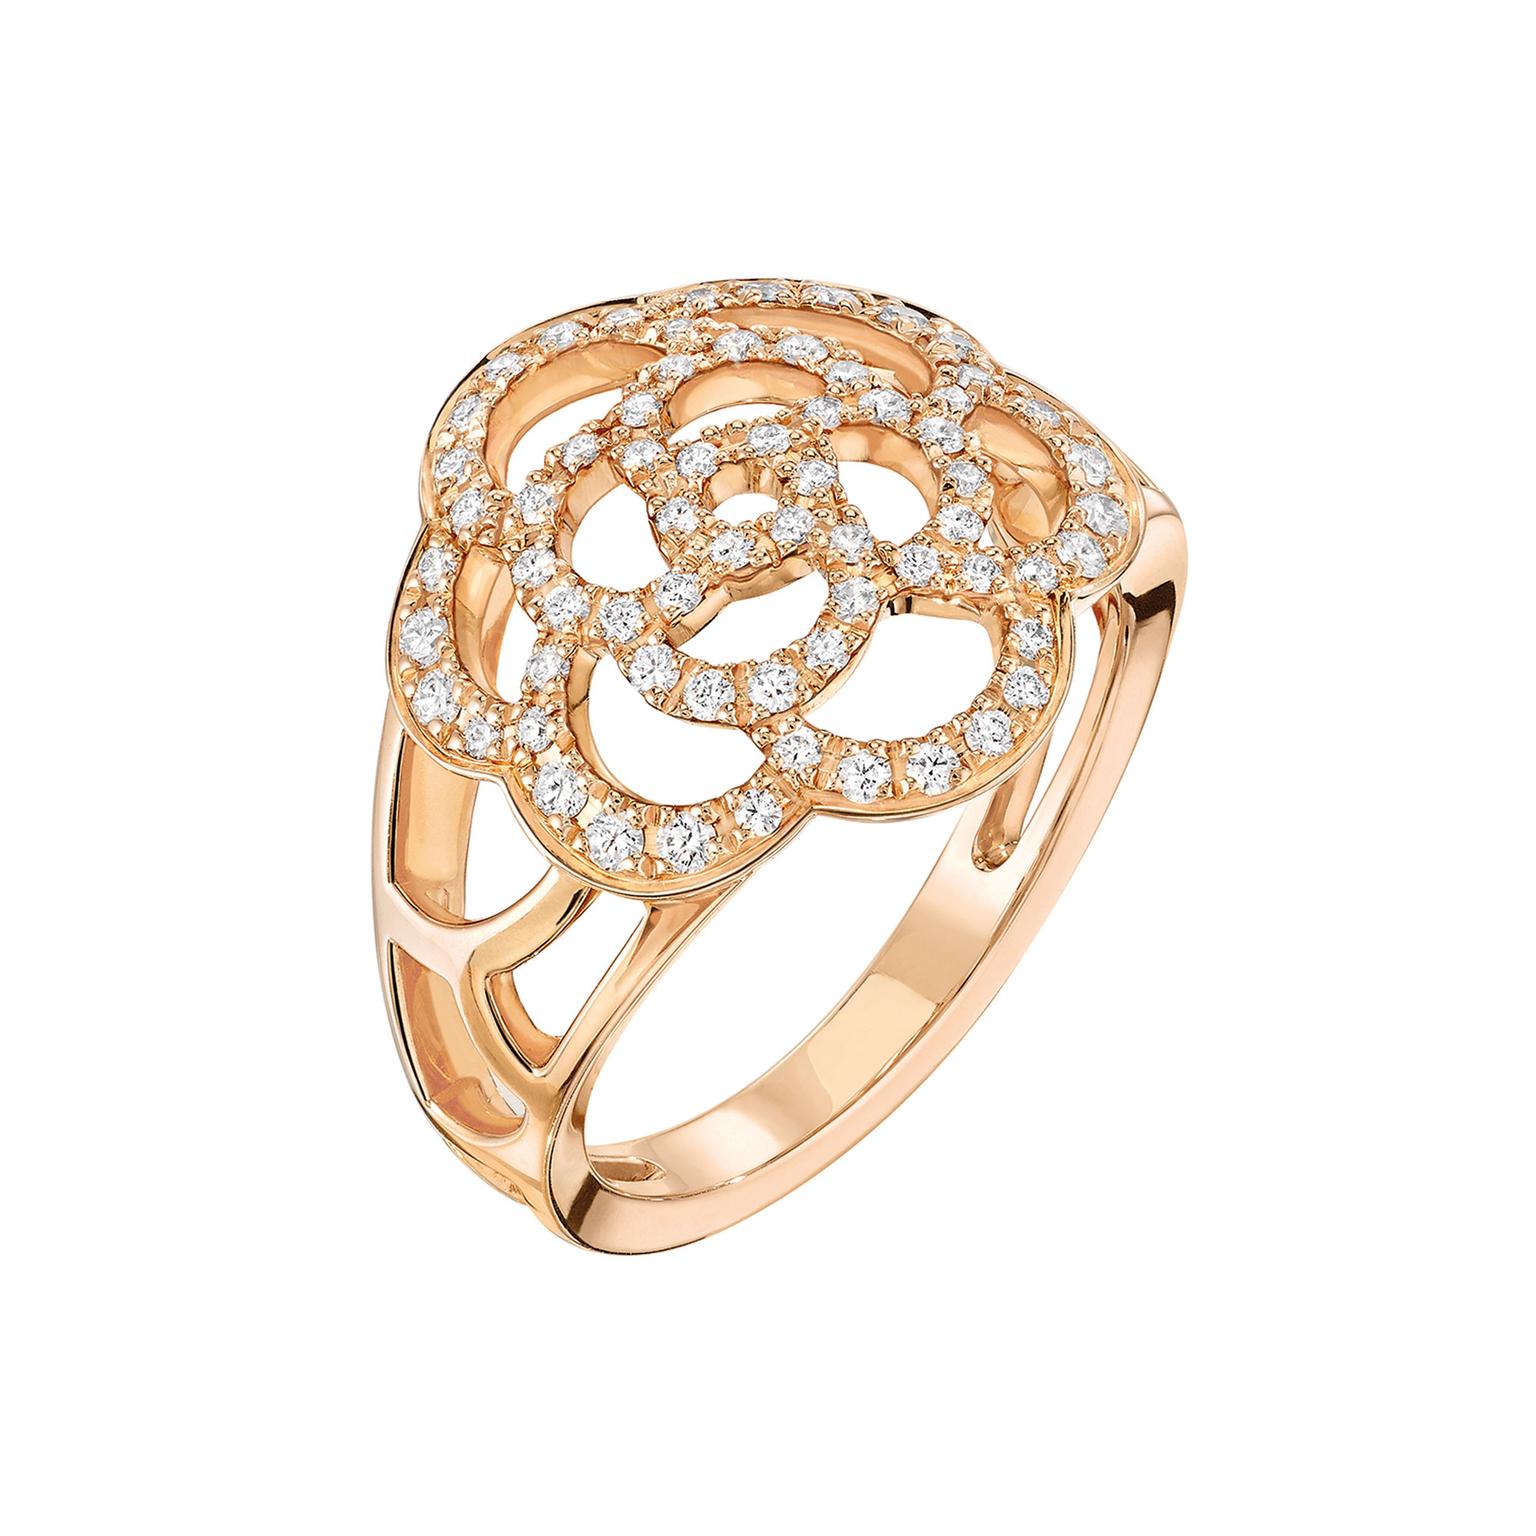 Camélia ring in rose gold and diamonds | Chanel | The Jewellery Editor